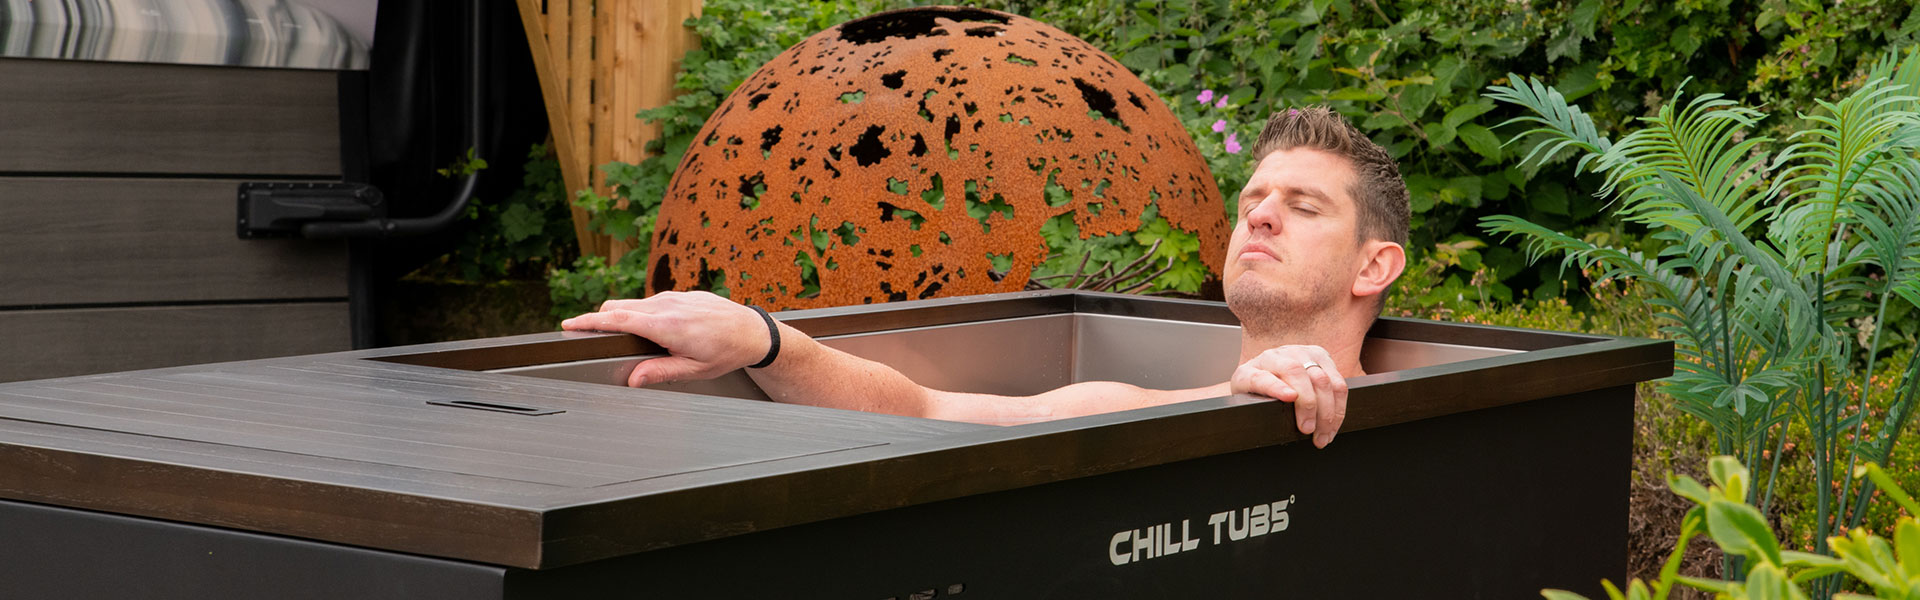 Superior Wellness Chill Tubs